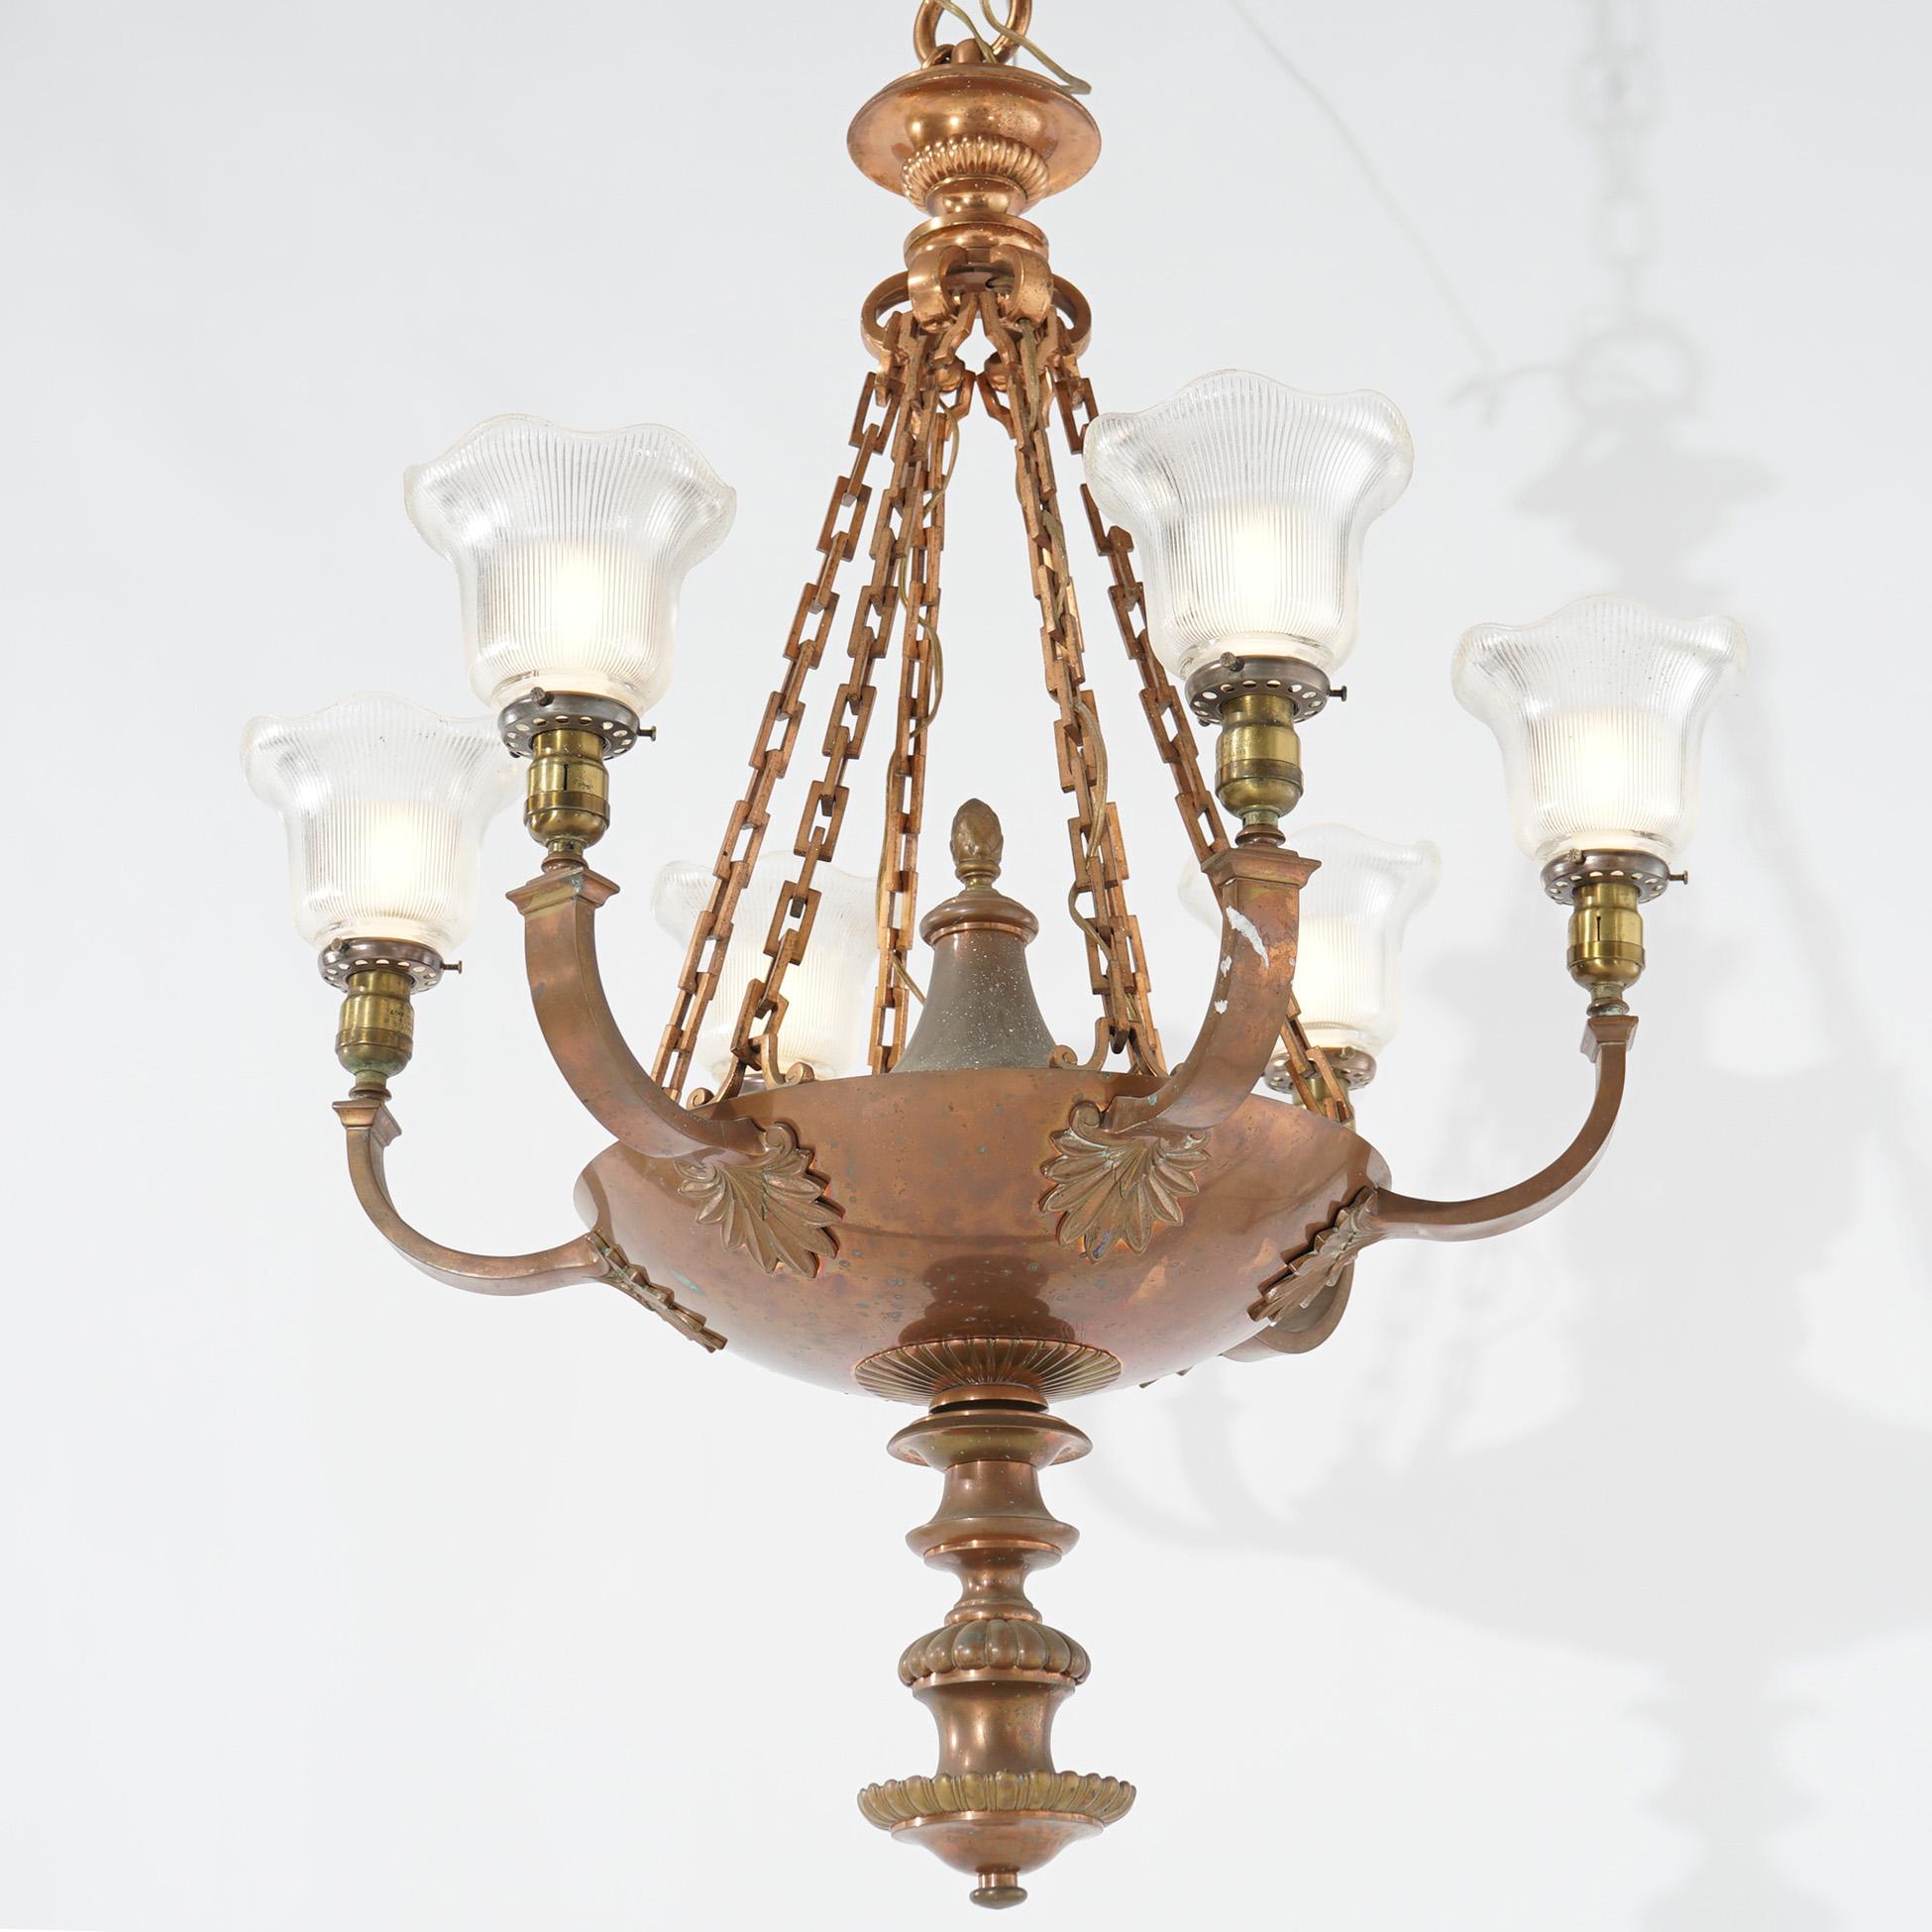 An antique French Empire style hanging pan chandelier offers bronze frame with six foliate form arms terminating in lights with glass shades, c1920

Measures- 41.5''H x 30.5''W x 30.5''D